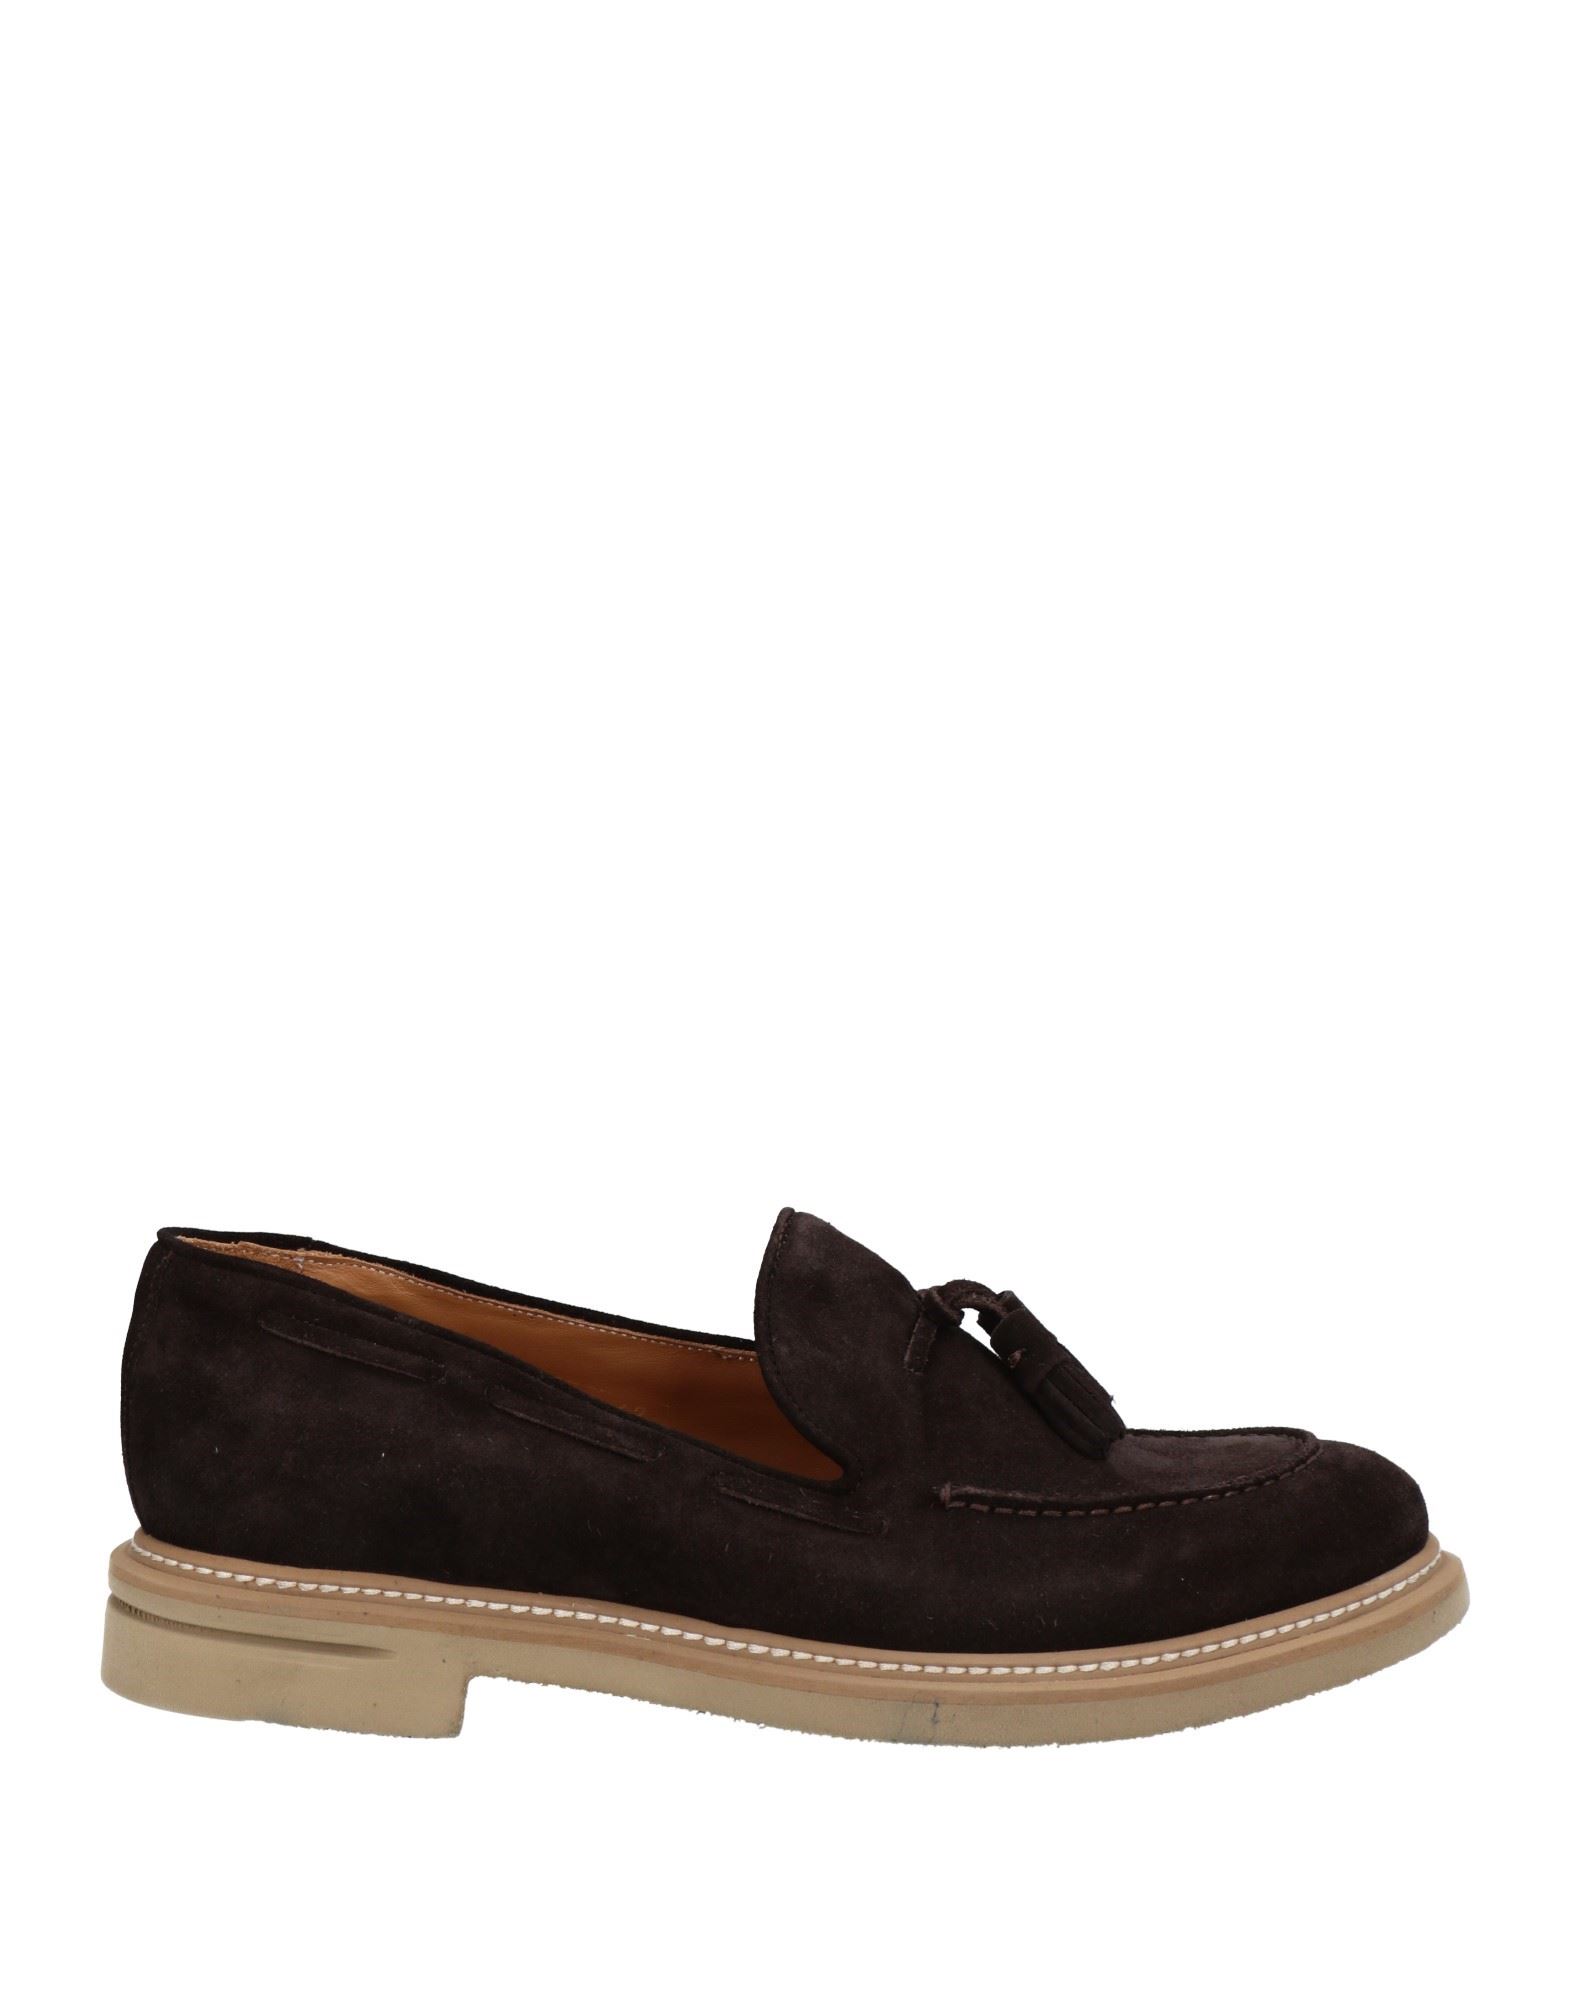 BRECOS Loafers